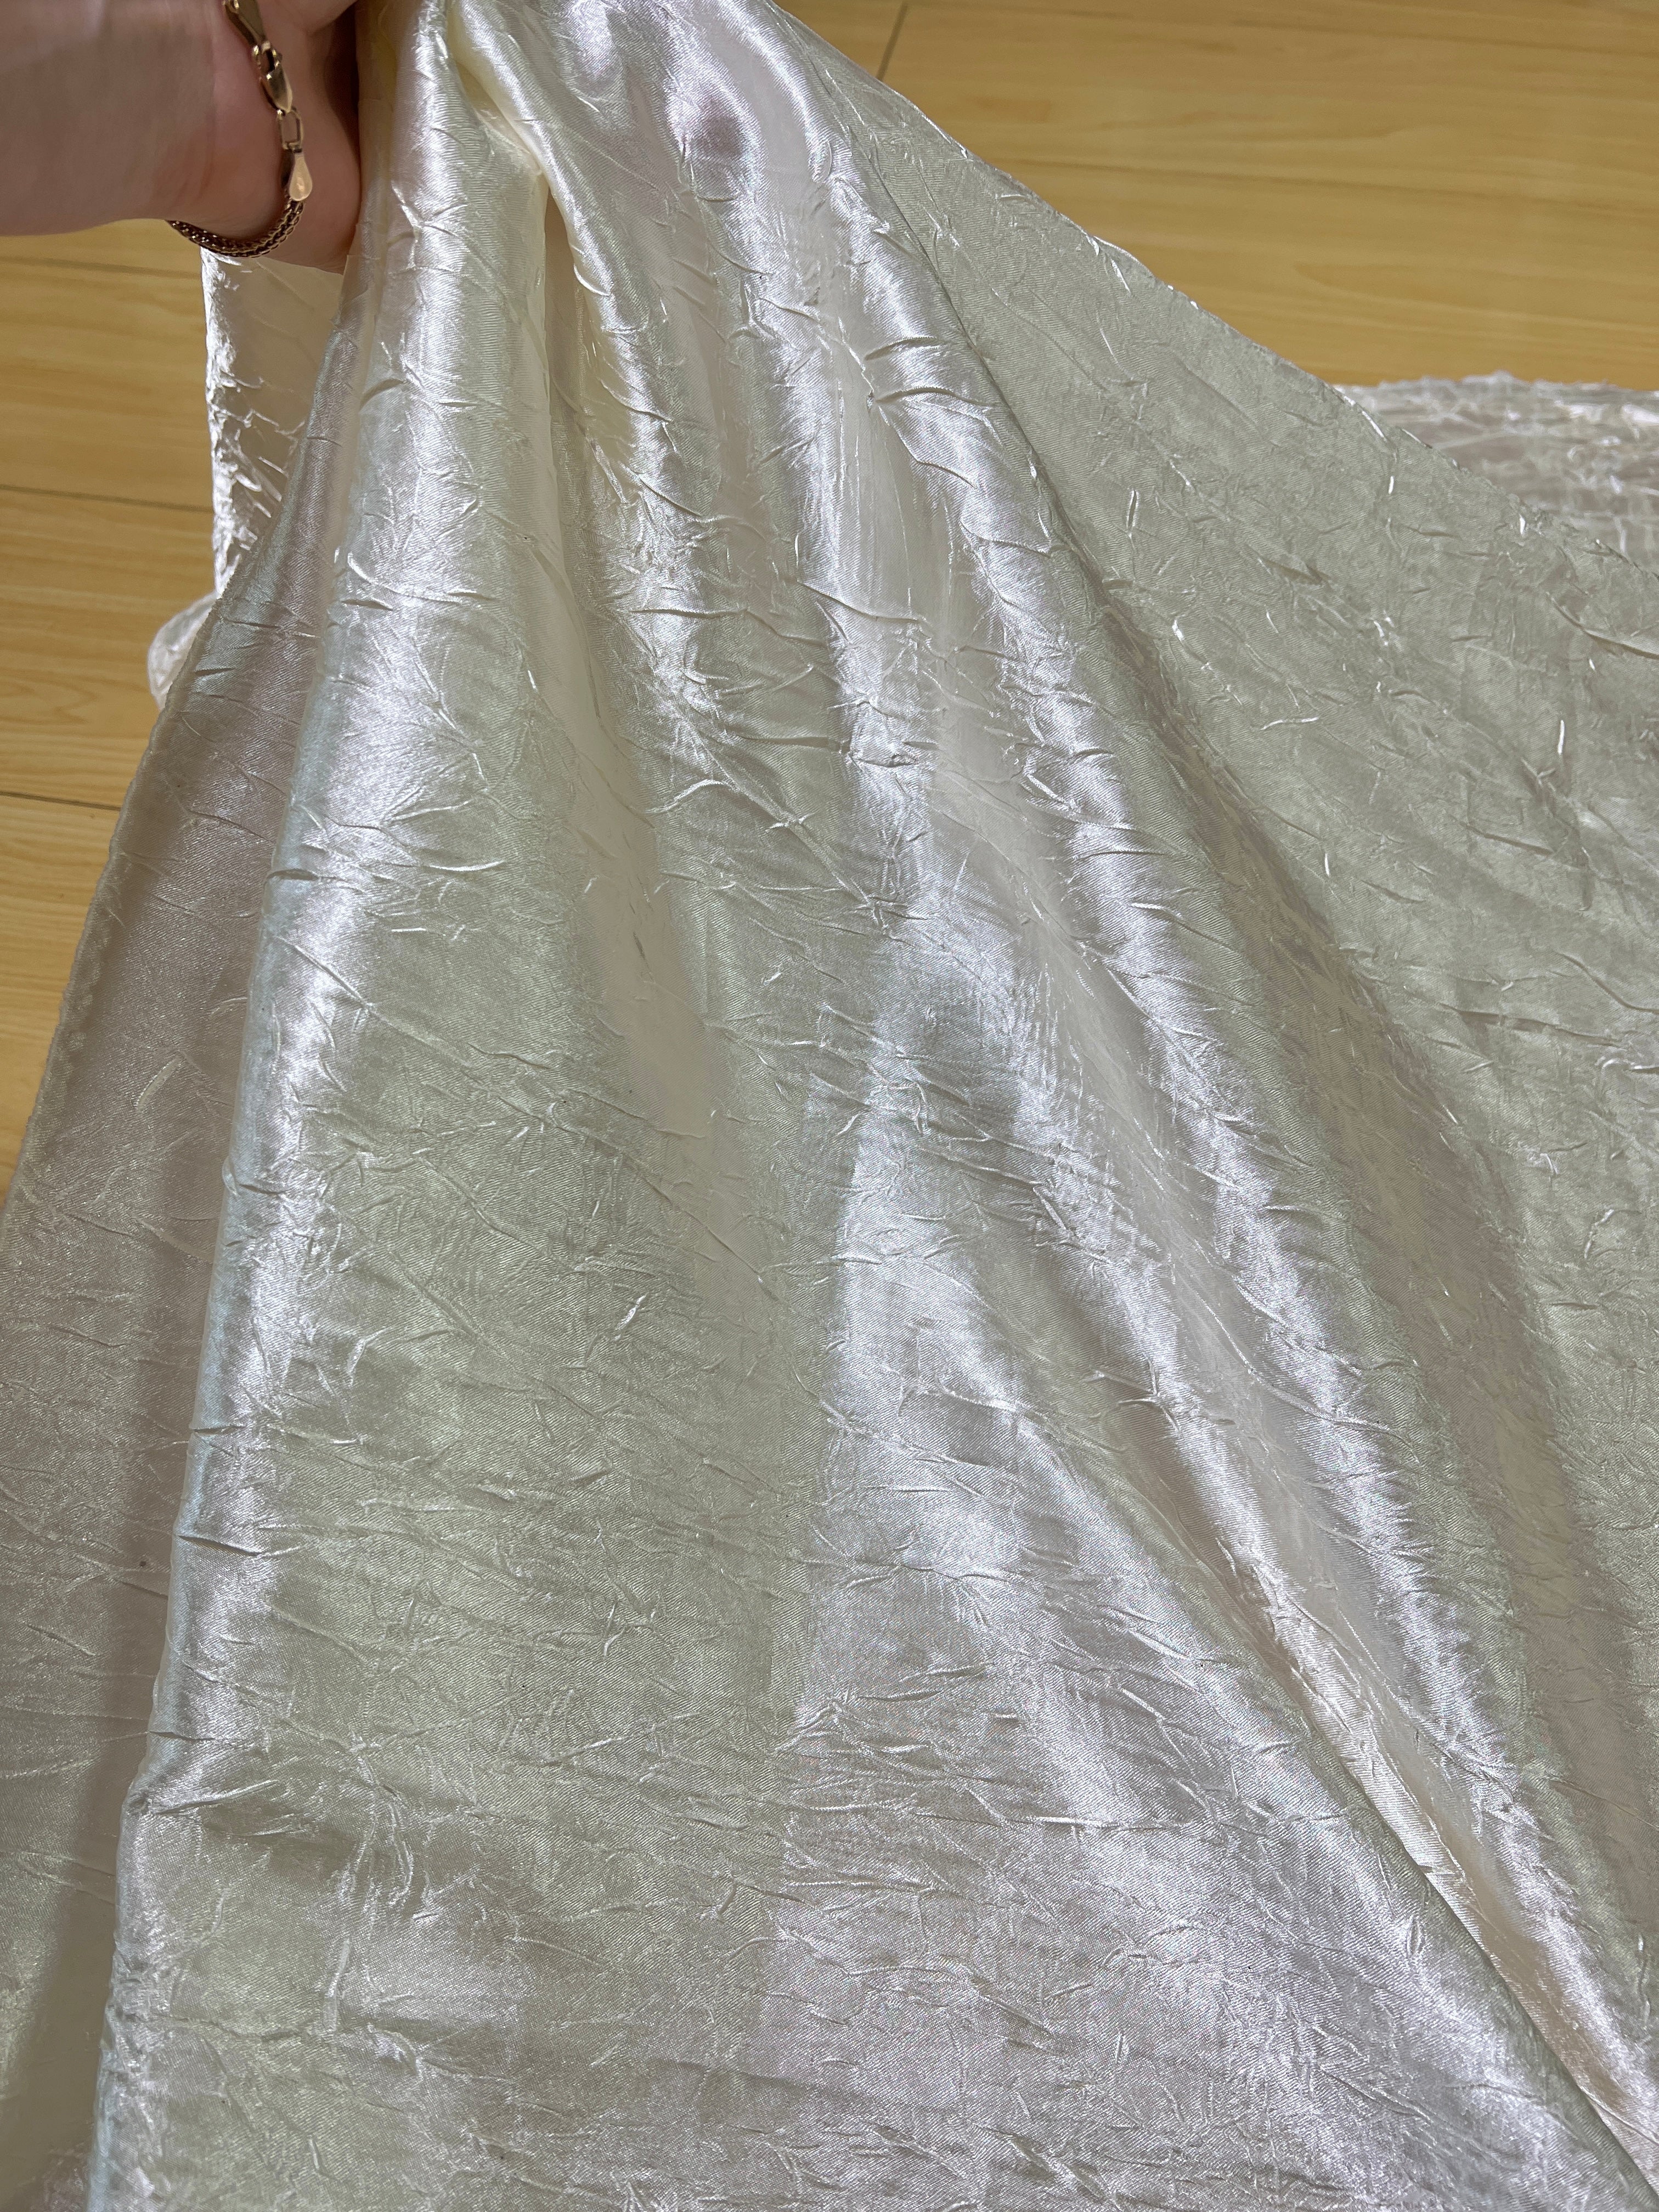 Ivory Crinkle Satin Fabric, Crushed Silk Fabric by yard, Eggshell Crinkle silk charmeuse, Bridal Satin Medium Weight, Satin for gown, Shiny Satin, satin for woman, silky satin, stretch satin, off white satin, kikitextile satin, cheap satin, satin in low price, buy satin online, discounted satin